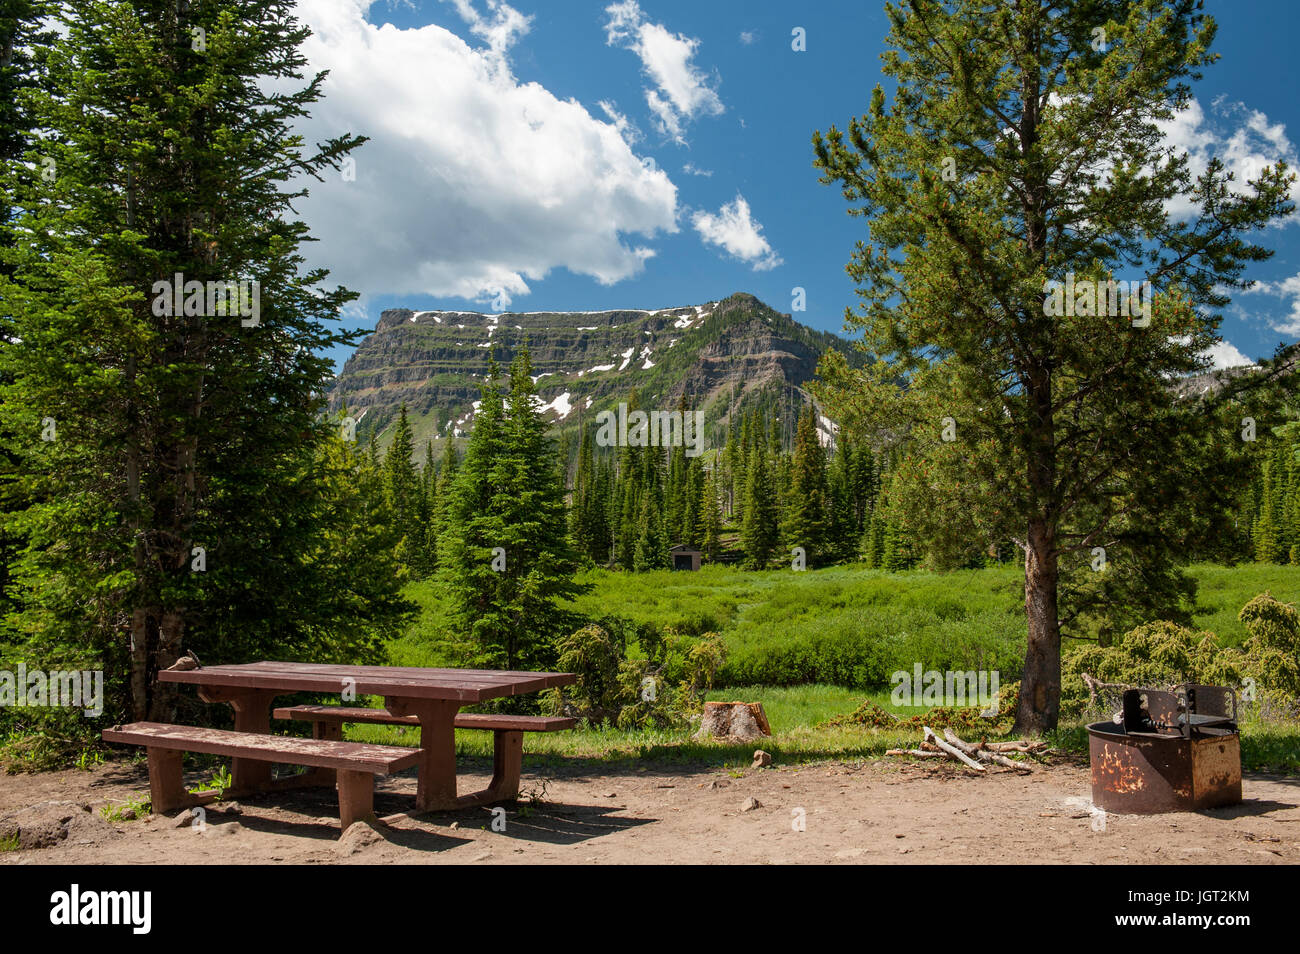 One of the camp sites at Trappers Lake in the White River National Forest near Meeker, Colorado. Stock Photo